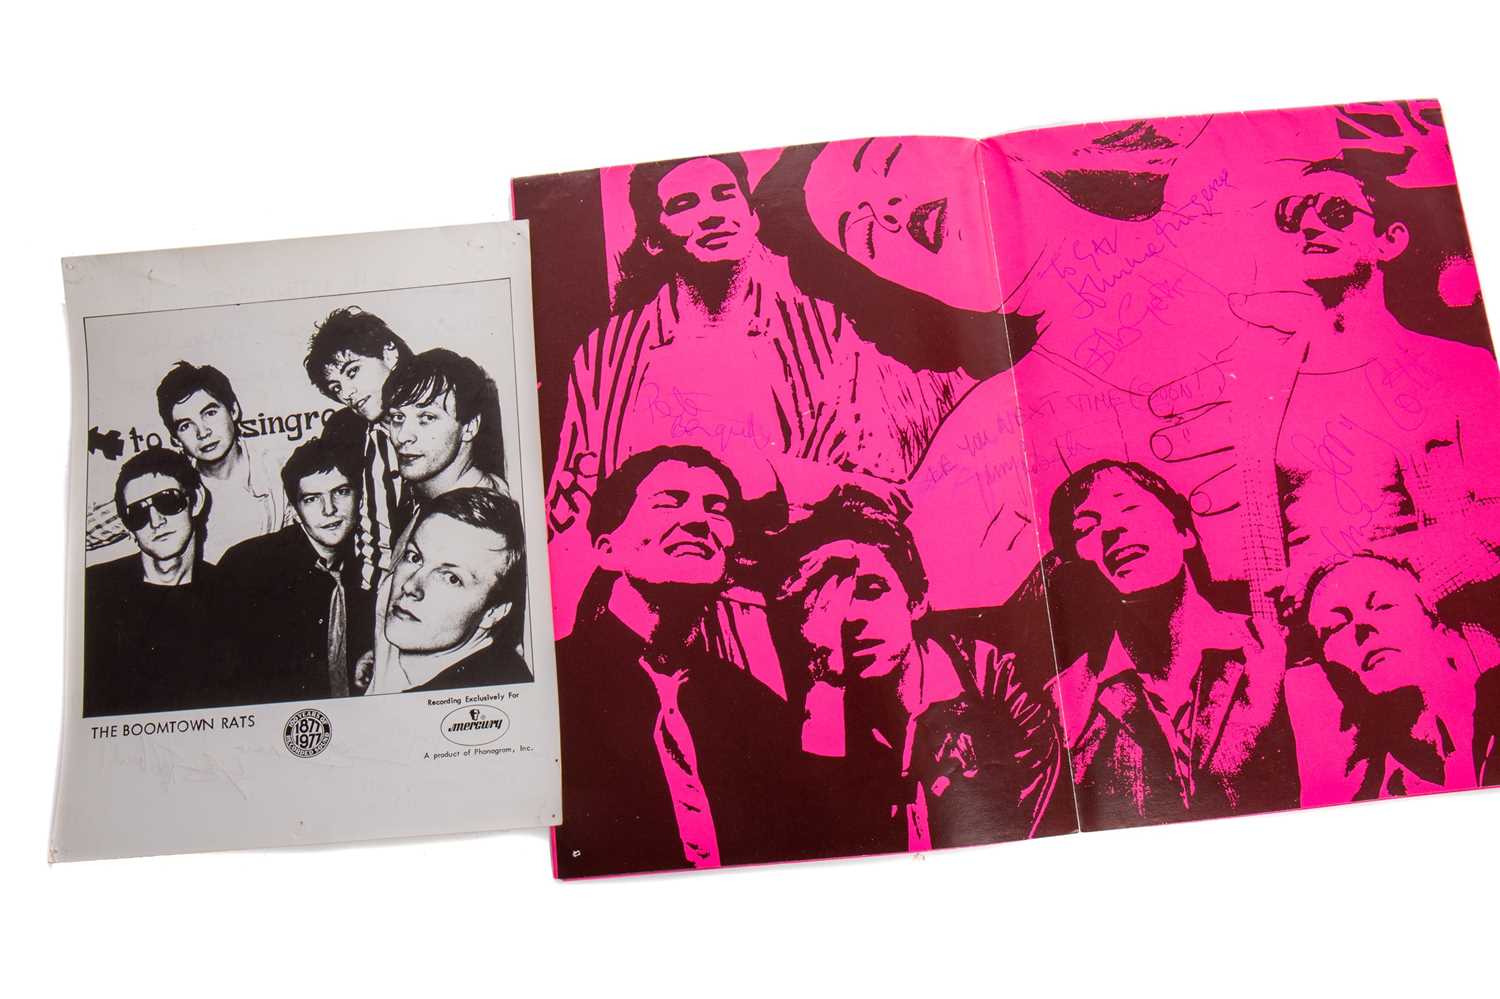 THE BOOMTOWN RATS - SIGNED PHOTOGRAPH AND POSTERGRAMME WITH A DOUBLE-SIDED POSTER